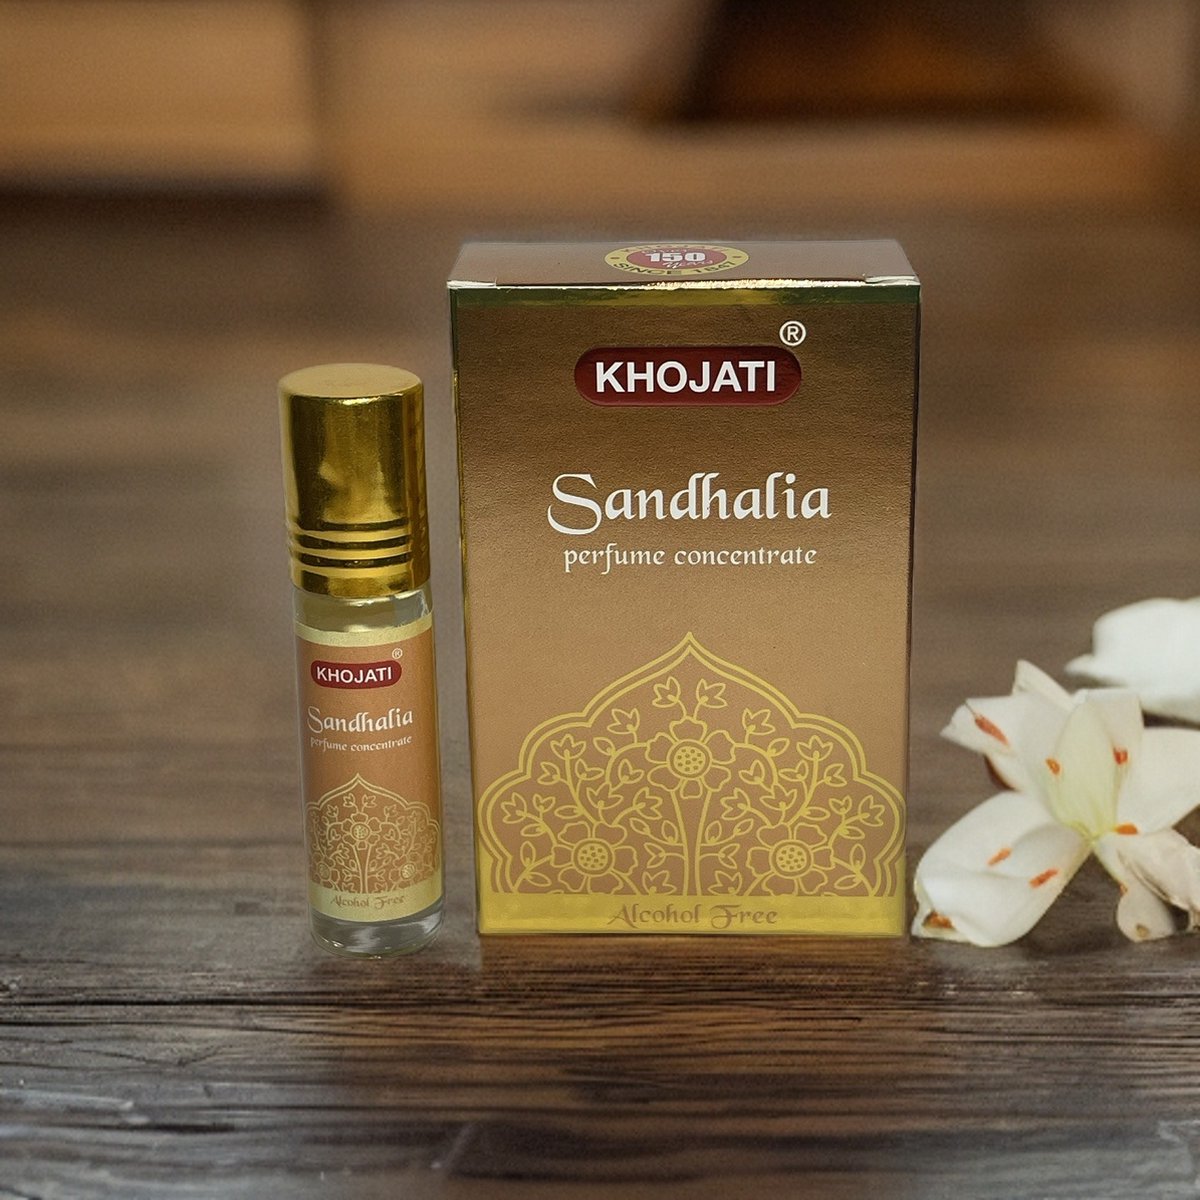 K-Veda - Sandhalia Perfume Concentrate - 6ml - Alcohol-Free - Pure Sandalwood Fragrance - Soft, Warm, - Charismatic Experience - Tranquility and Charm with this Exquisite Perfume